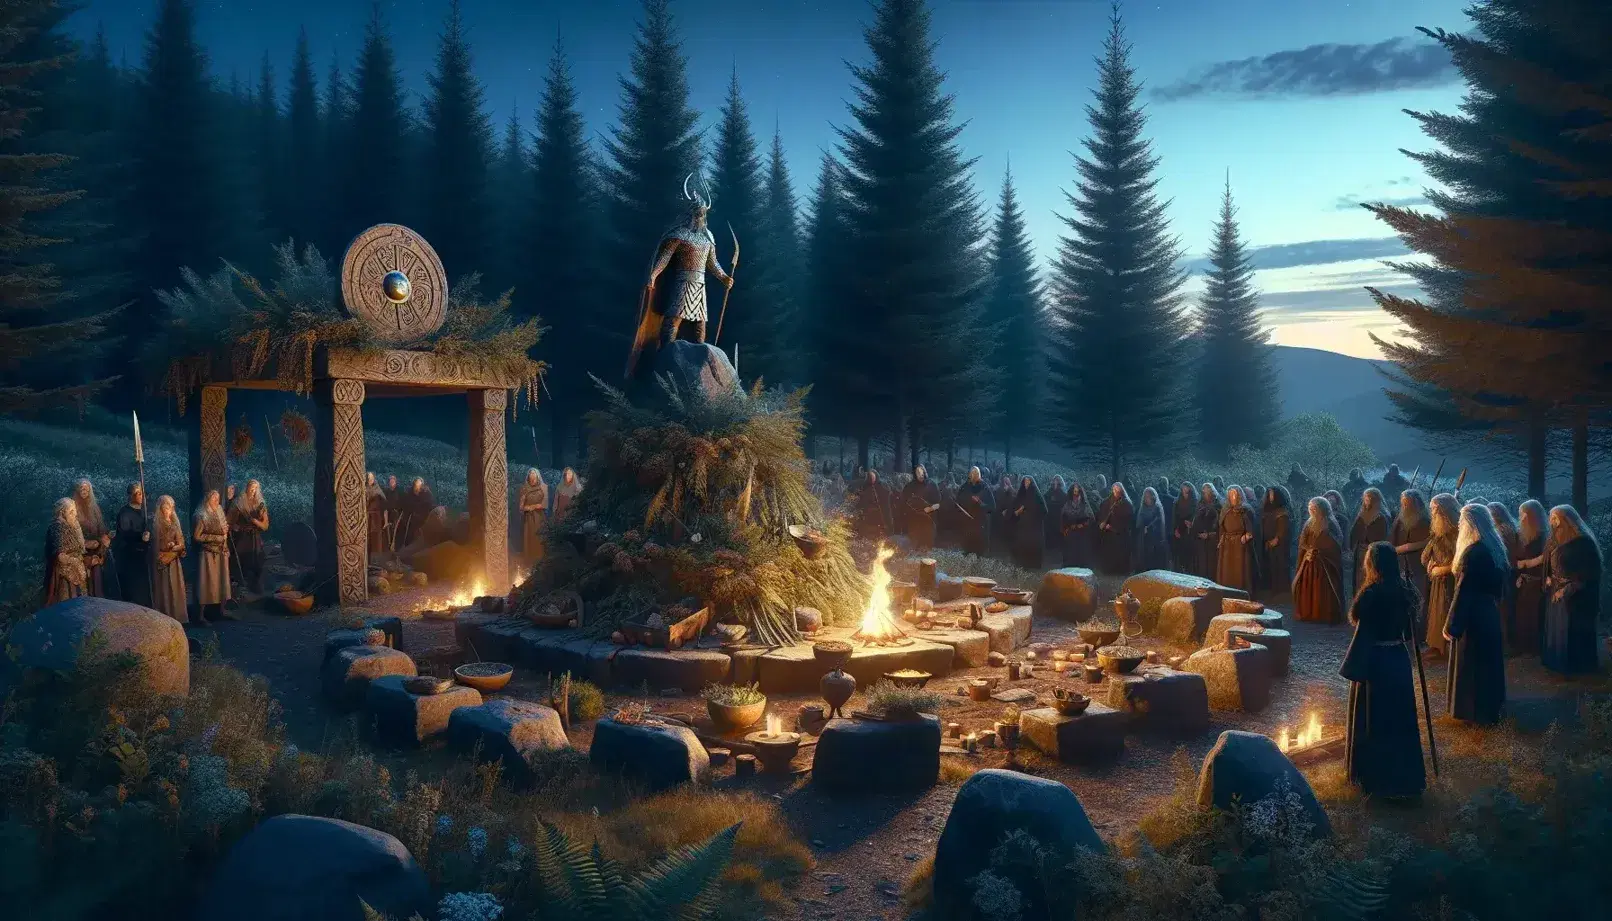 Twilight descends on a serene Norse ritual in a pine forest clearing, with an altar bearing offerings, a deity statue, and a fire pit illuminating reverent figures.